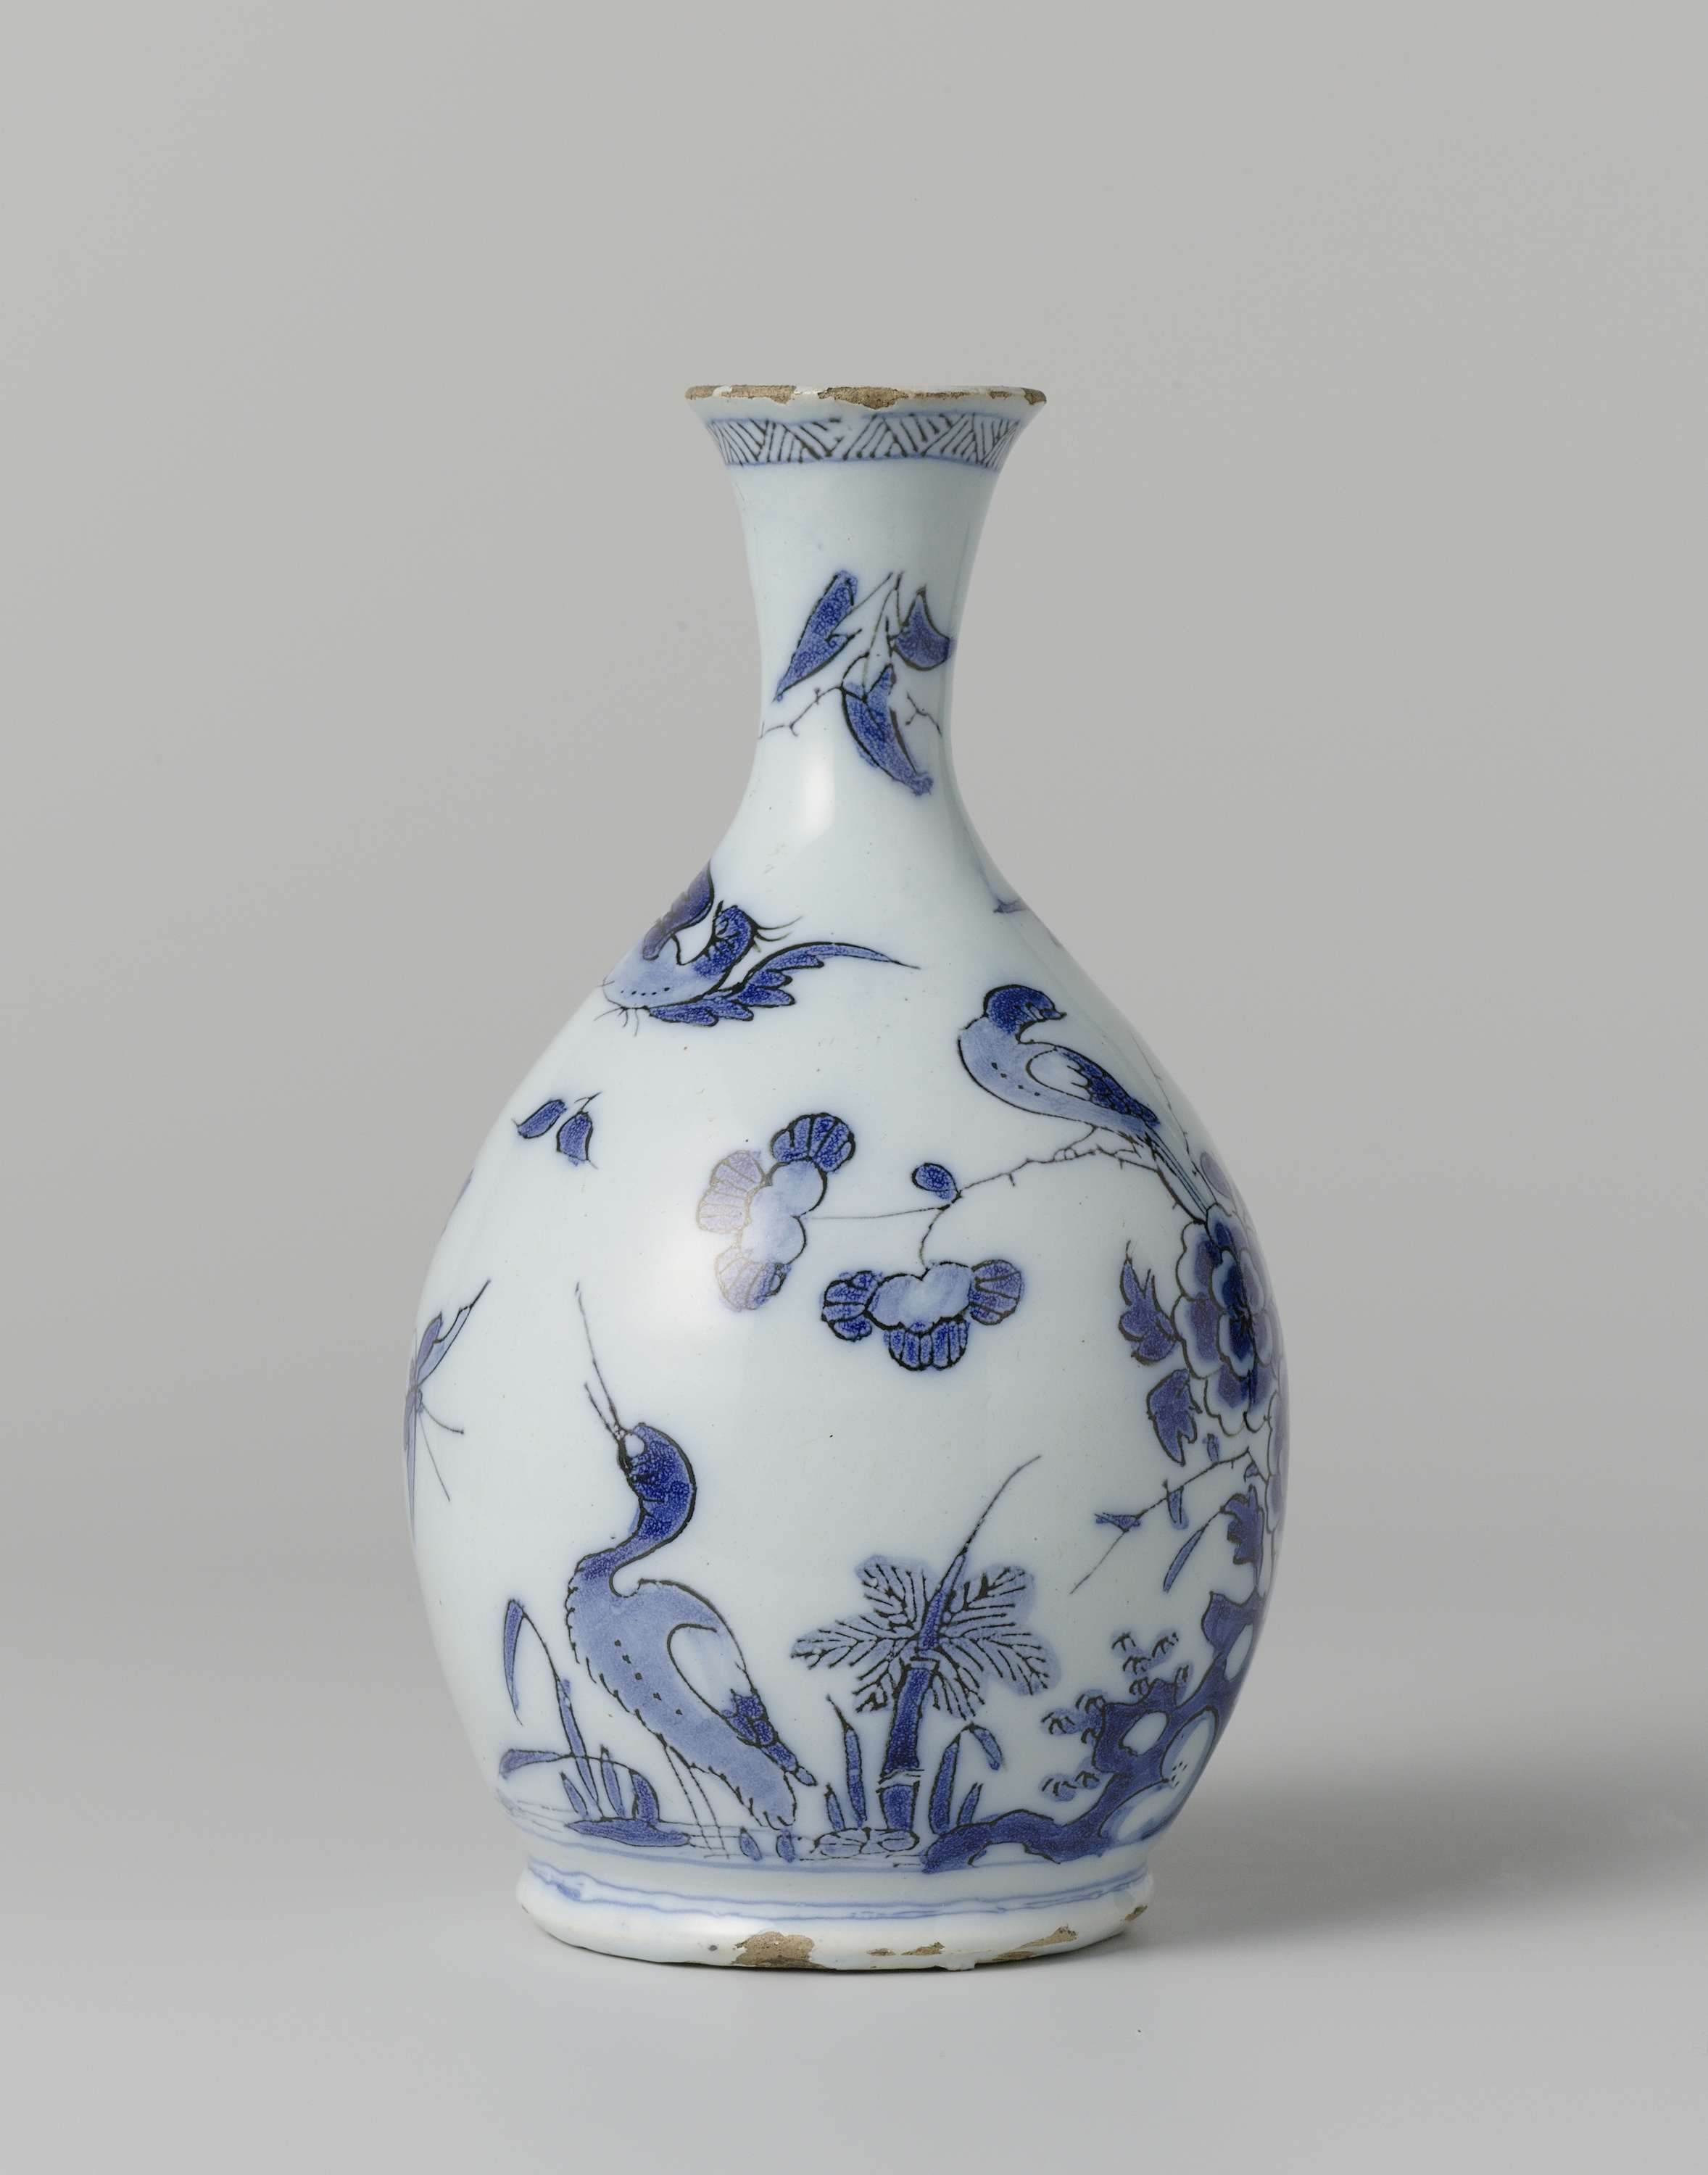 blue and white floral ceramic vase of het moriaanshooft vase het moriaanshooft rochus jacobsz in hoppesteijn place delft dating c 1685 c 1690 faience vase with the chinese porcelain inspired flowers